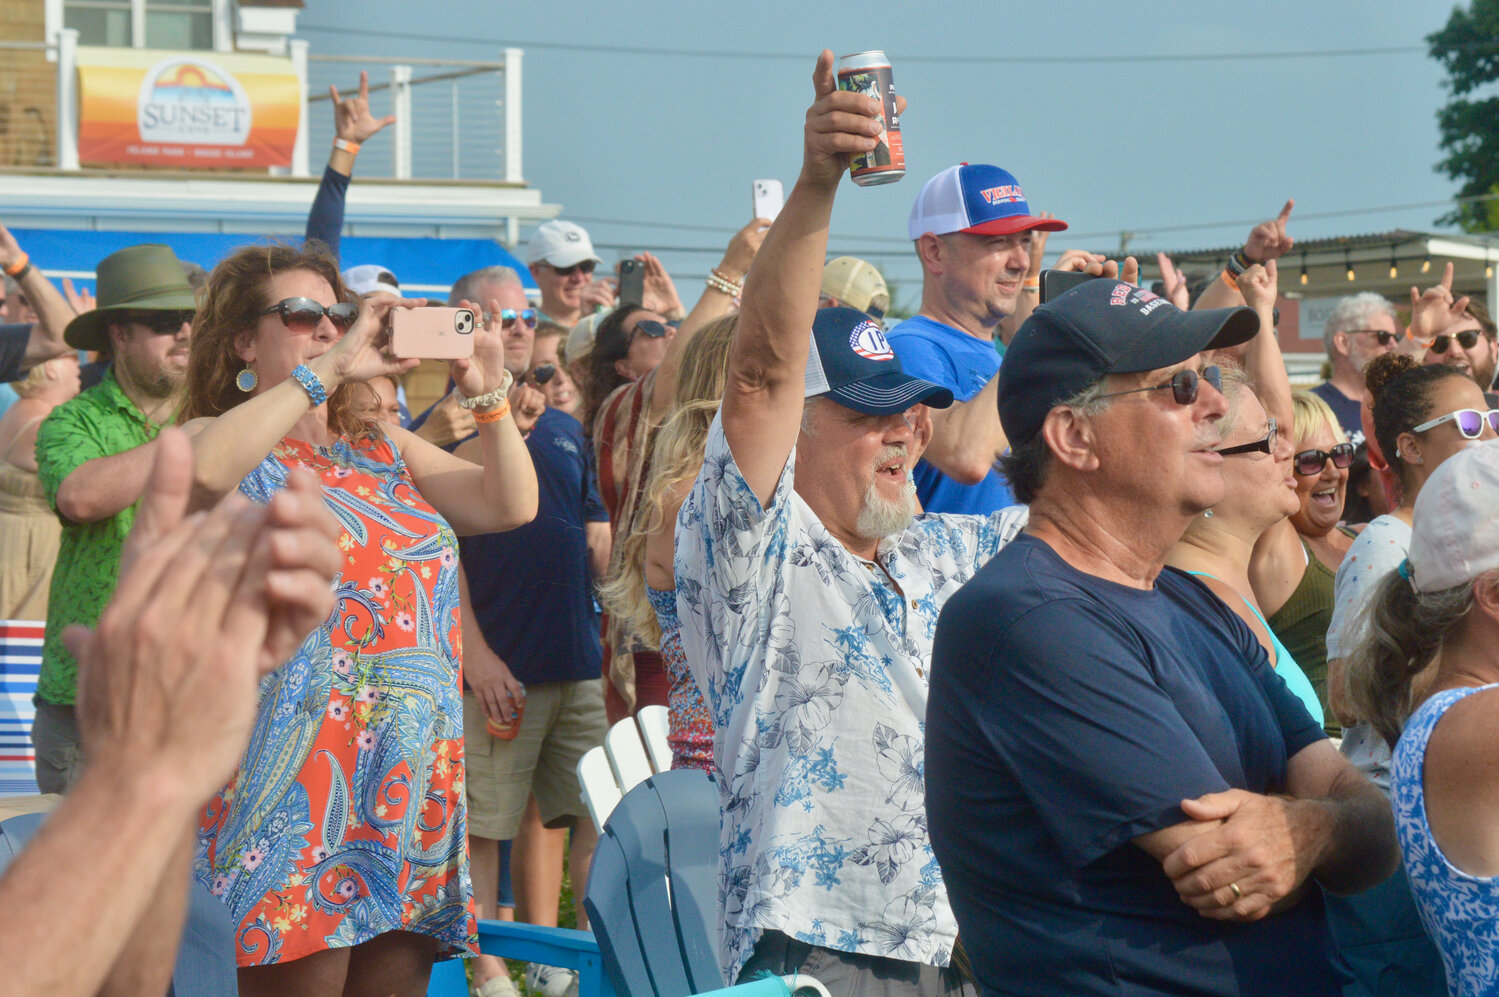 Members of the crowd groove to the sounds of “Margaritaville” and other Buffett hits.